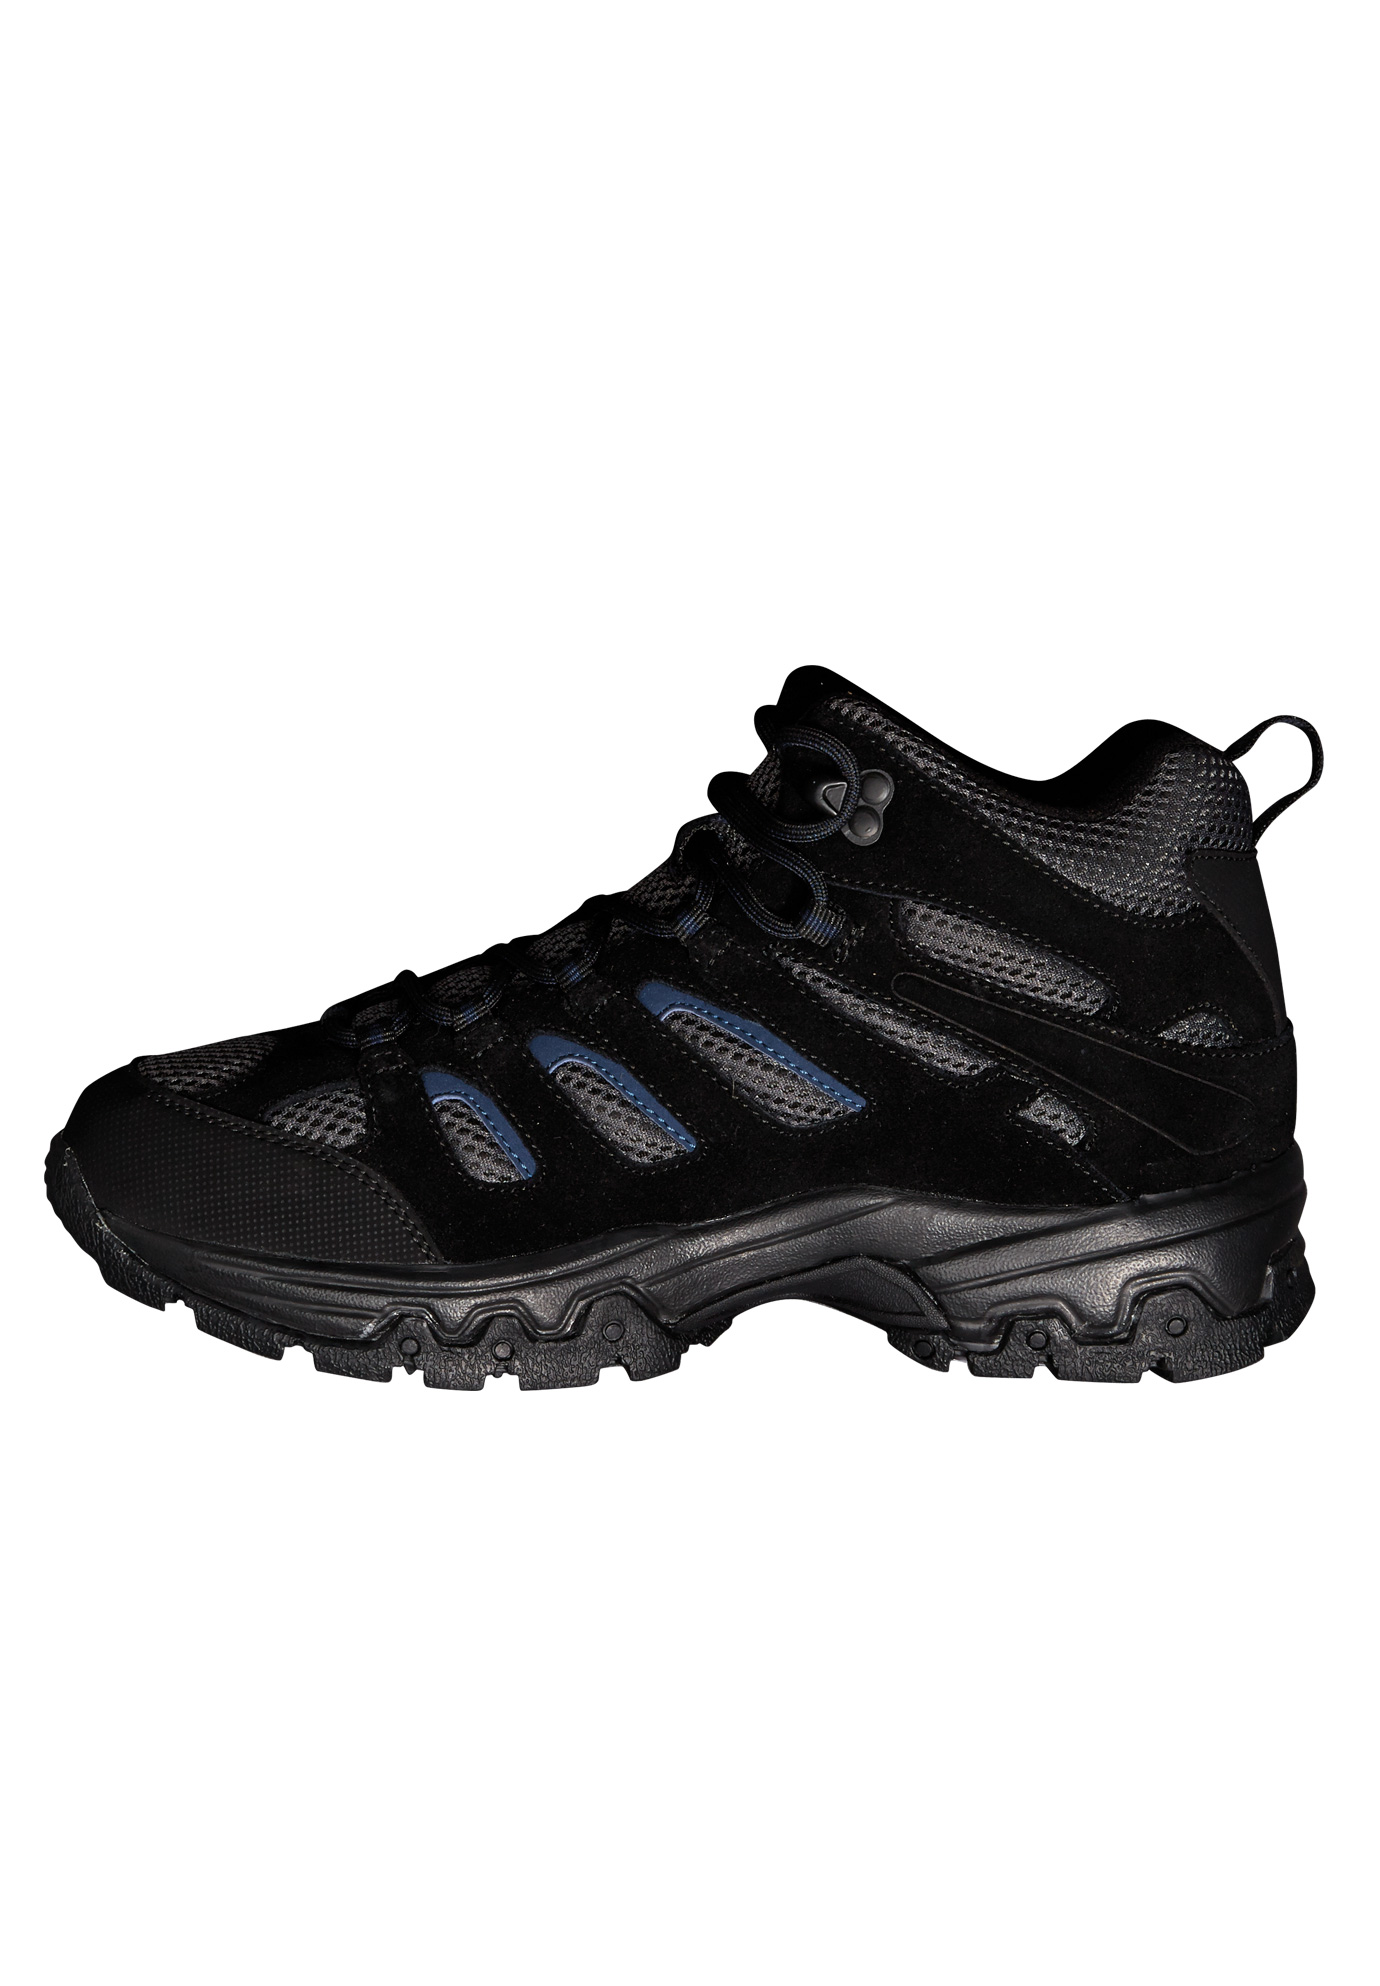 Boulder Creek™ Lace-up Hiking Boots, 